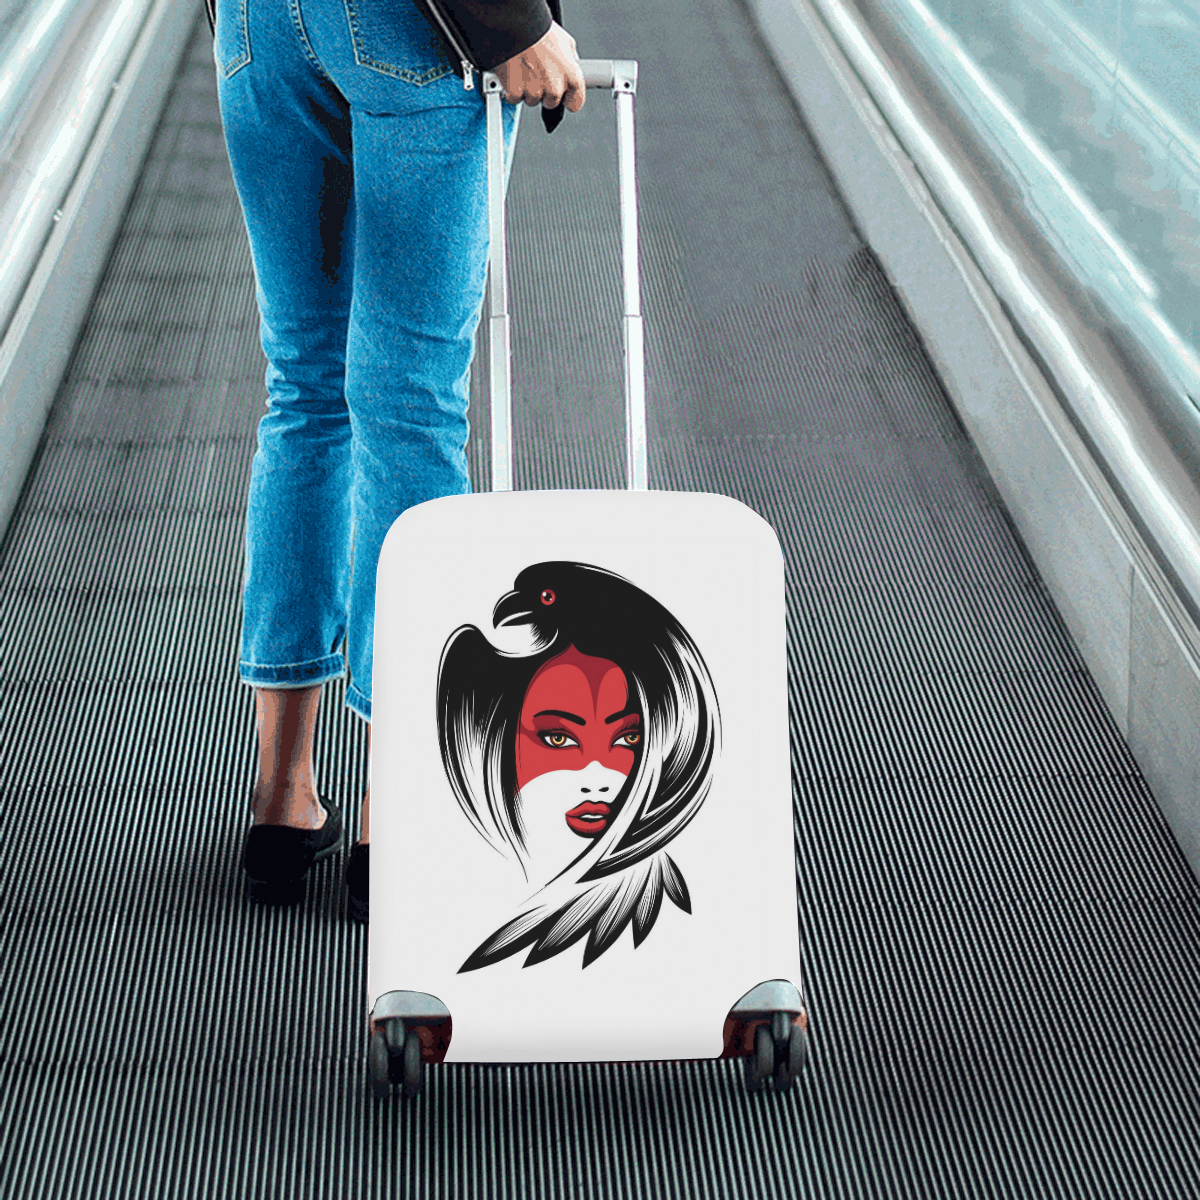 Raven Lady Luggage Cover/Small 18"-21"